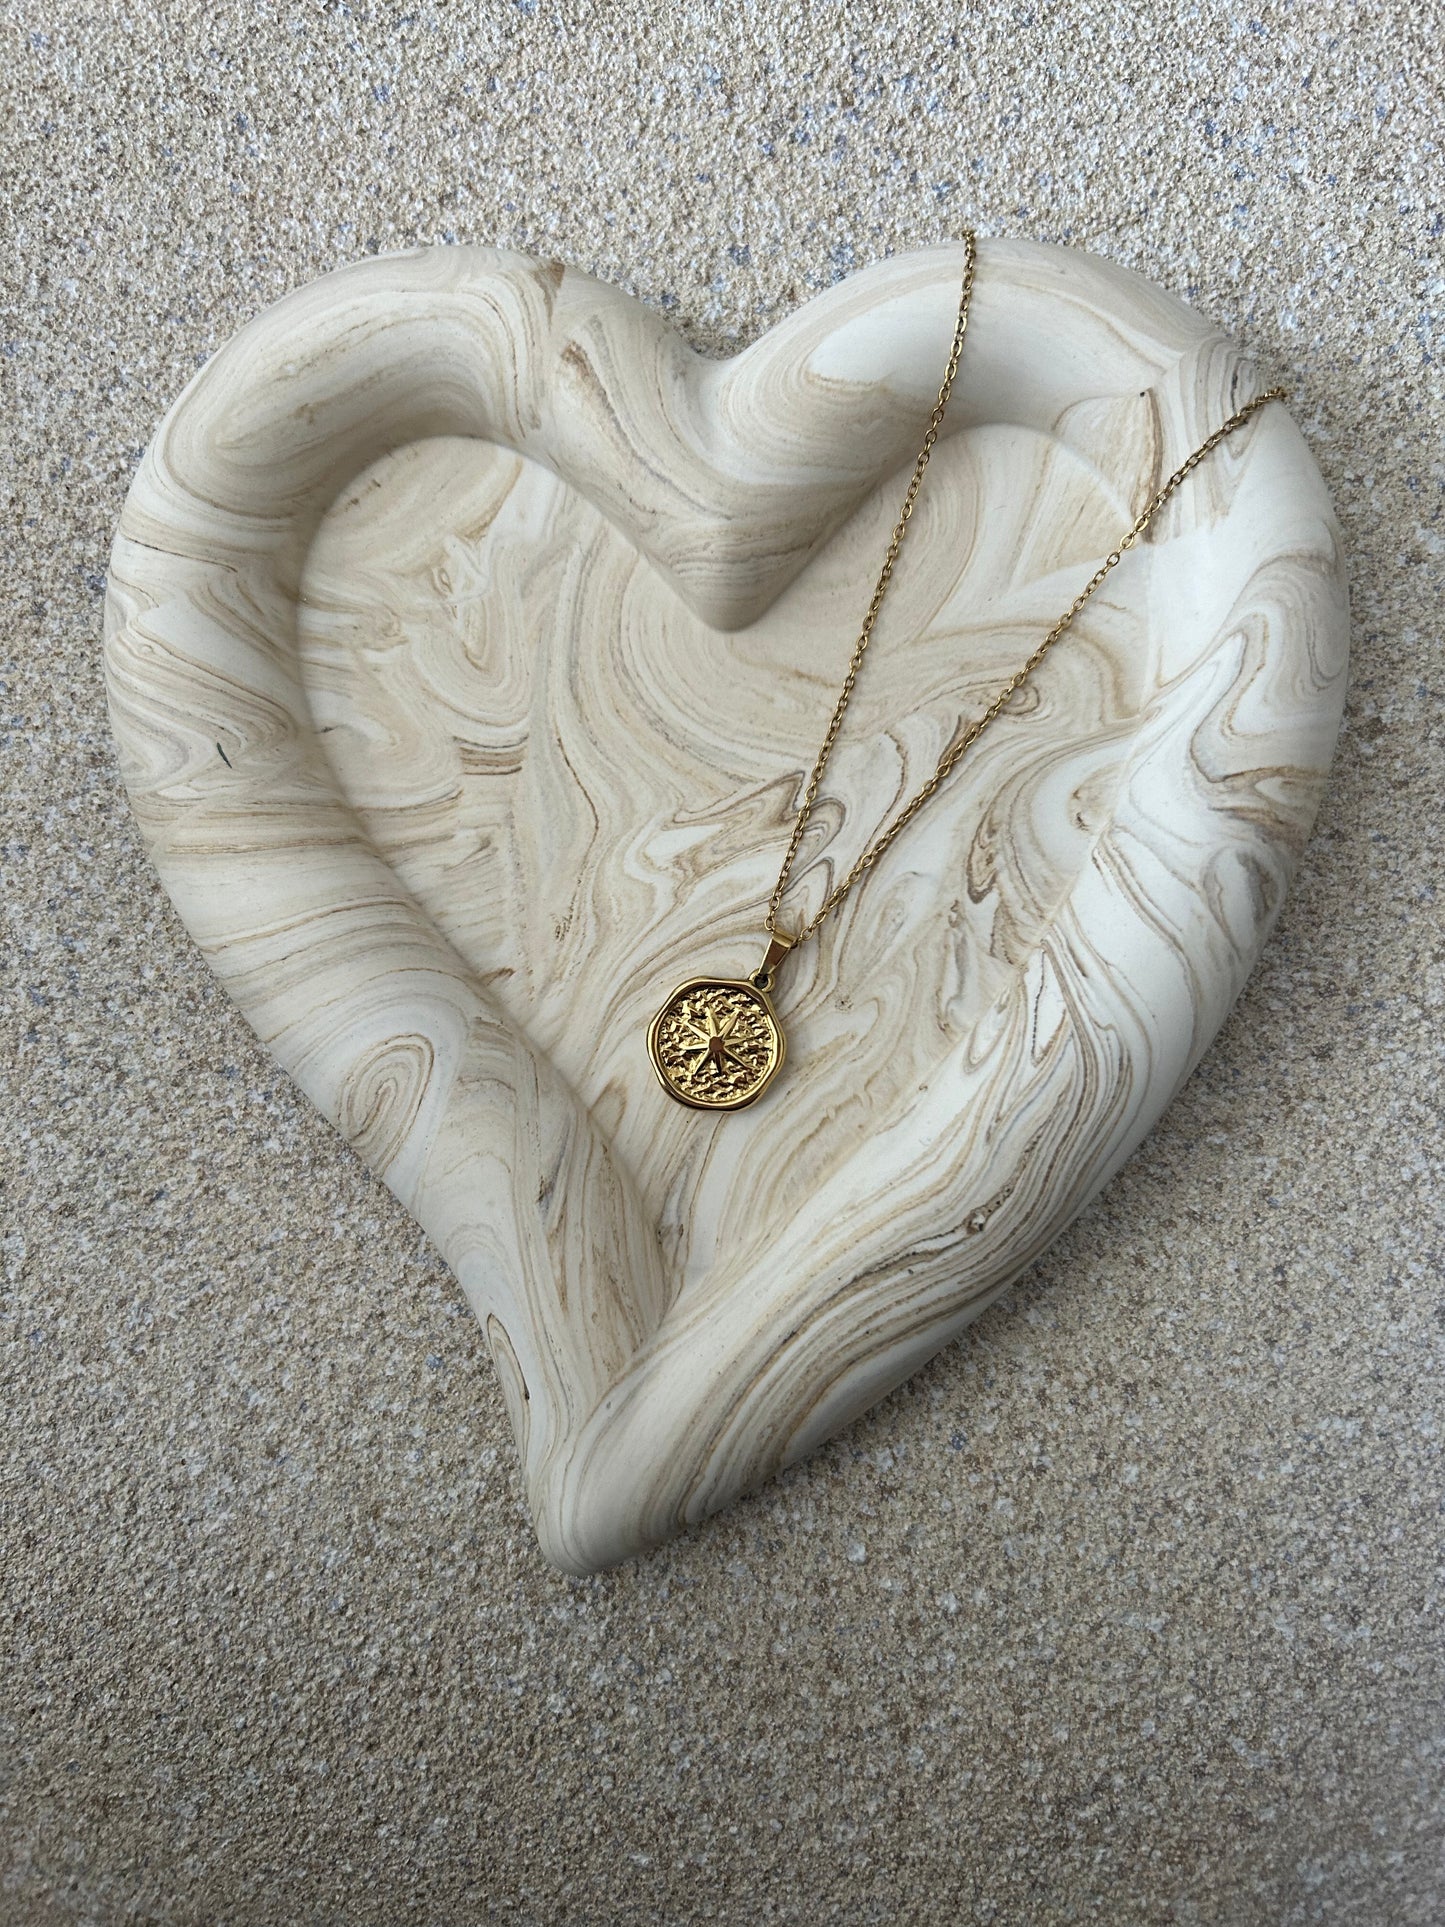 Handmade Home Accessories - A beige marble chunky heart trinket dish, on a natural stone backgrounf with a star coin necklace displayed on it.